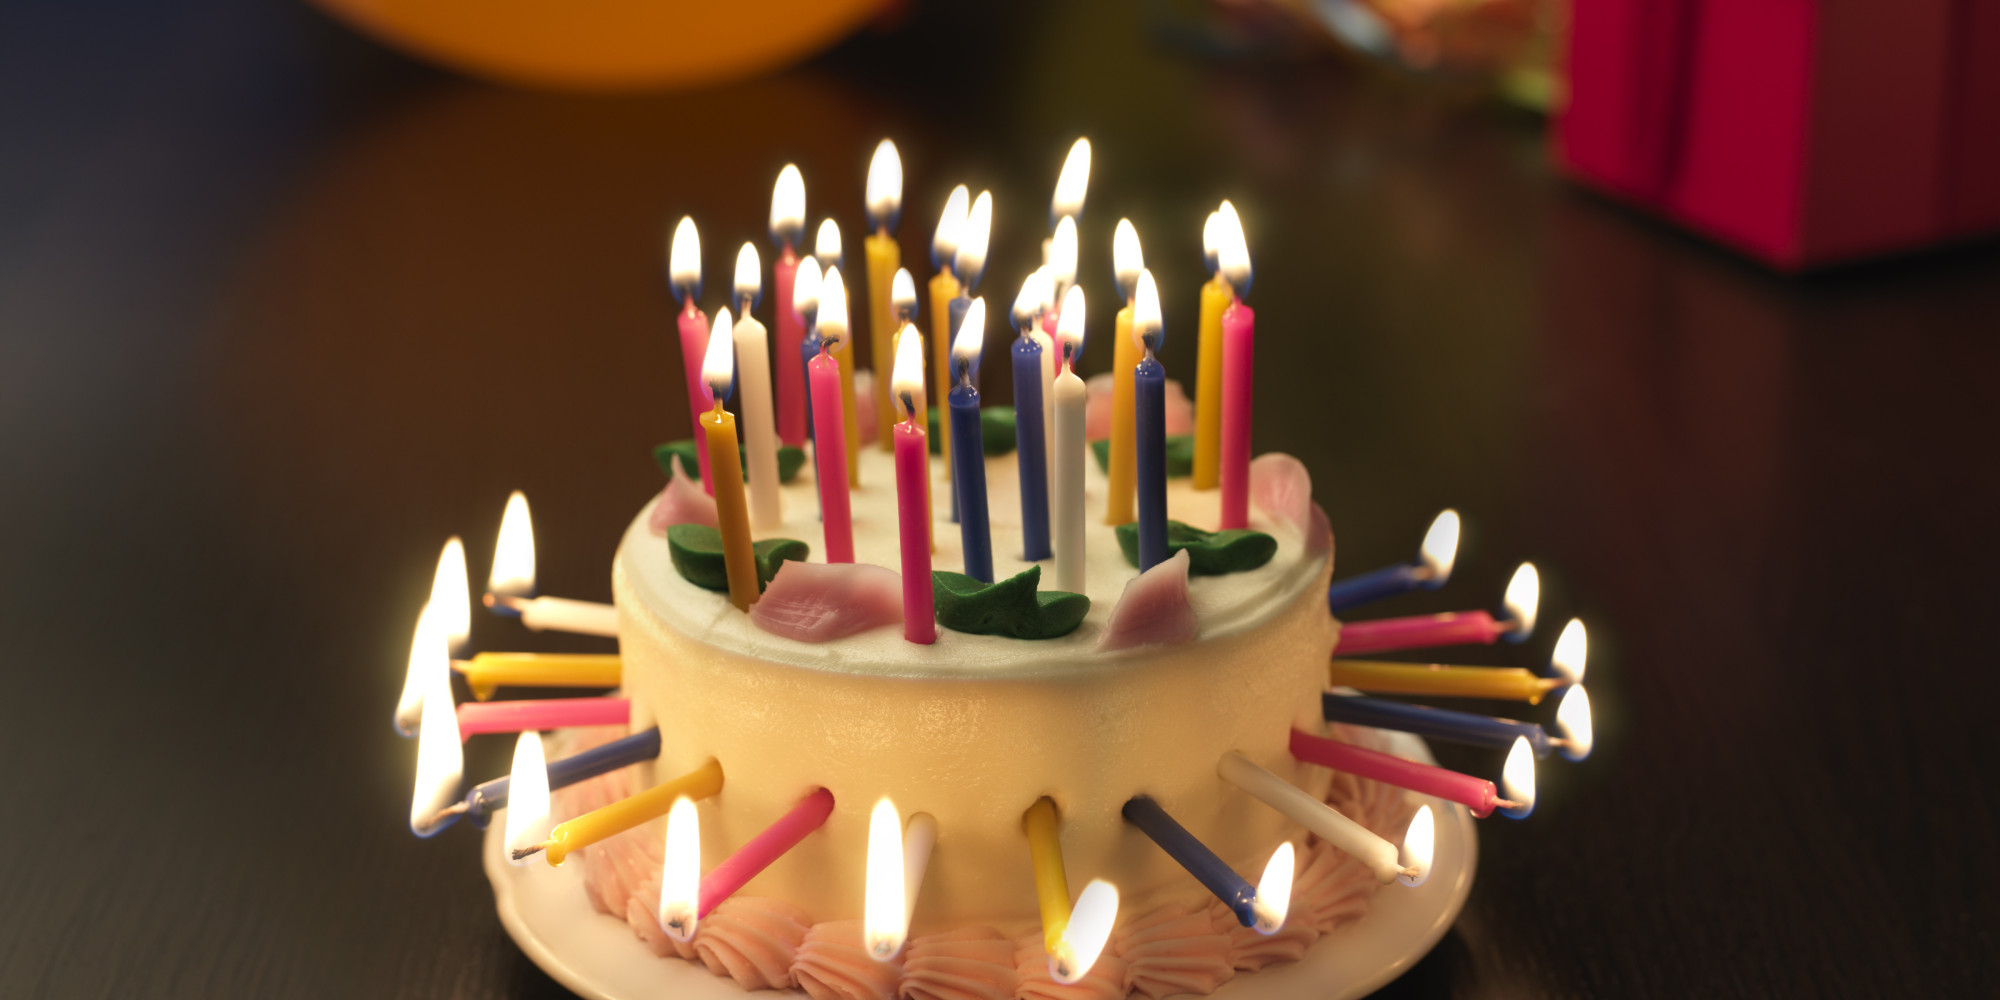 o-CAKE-WITH-LOTS-OF-CANDLES-facebook.jpg